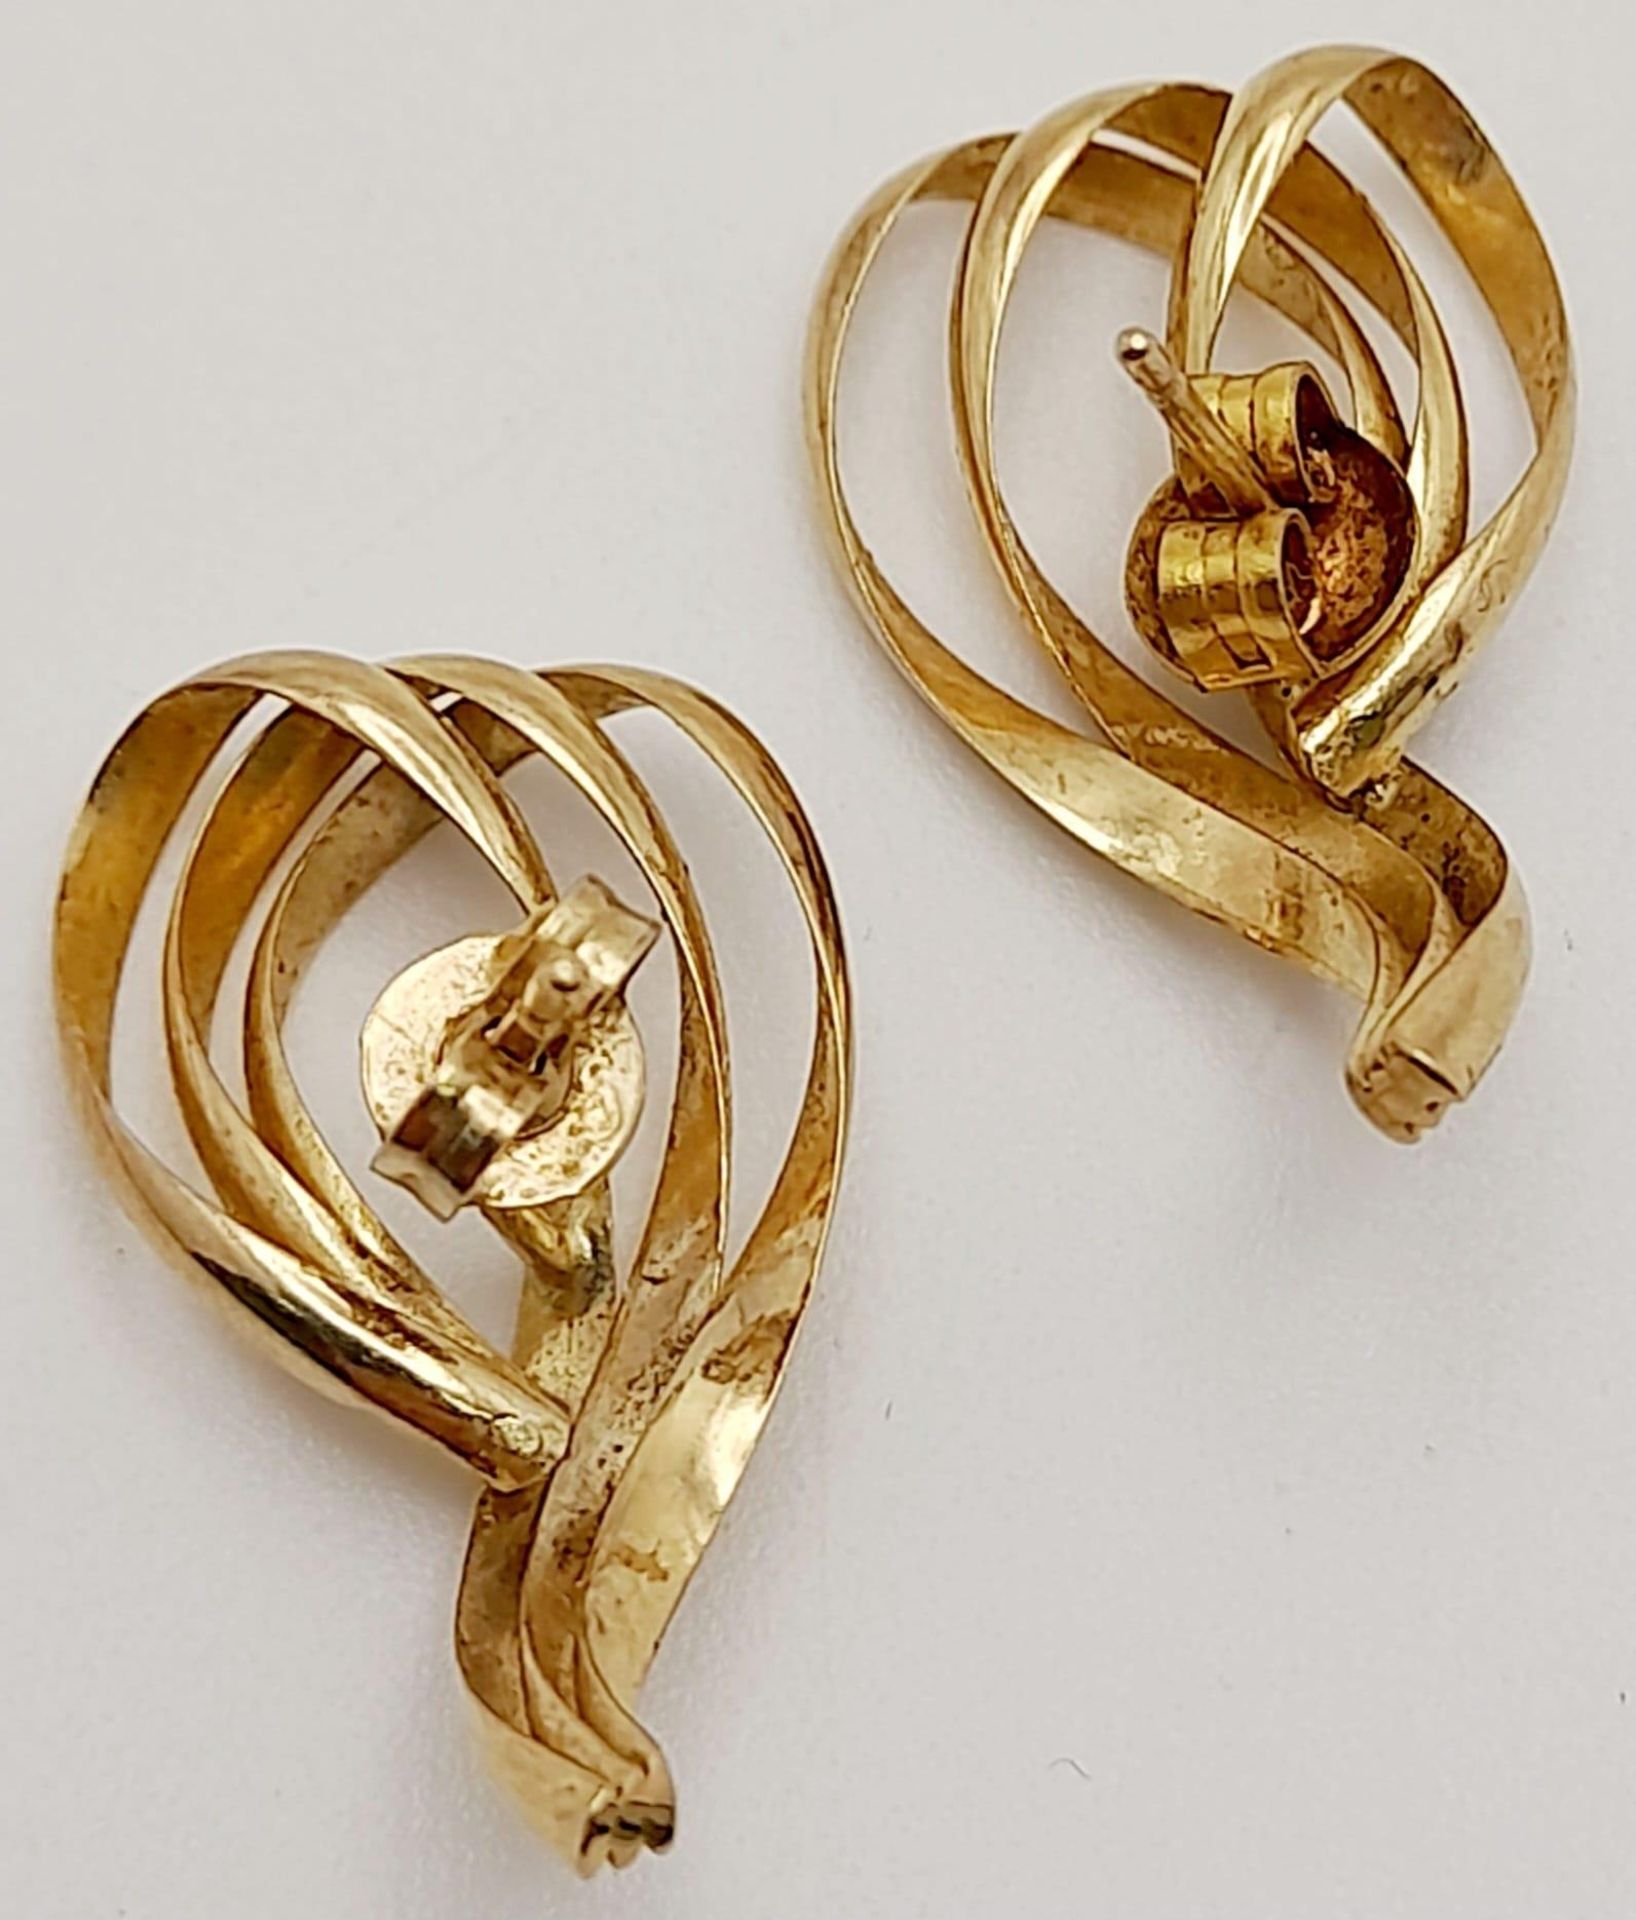 A Pair of 9K Yellow Gold Swirl Earrings. 2.55g total weight. - Image 8 of 11